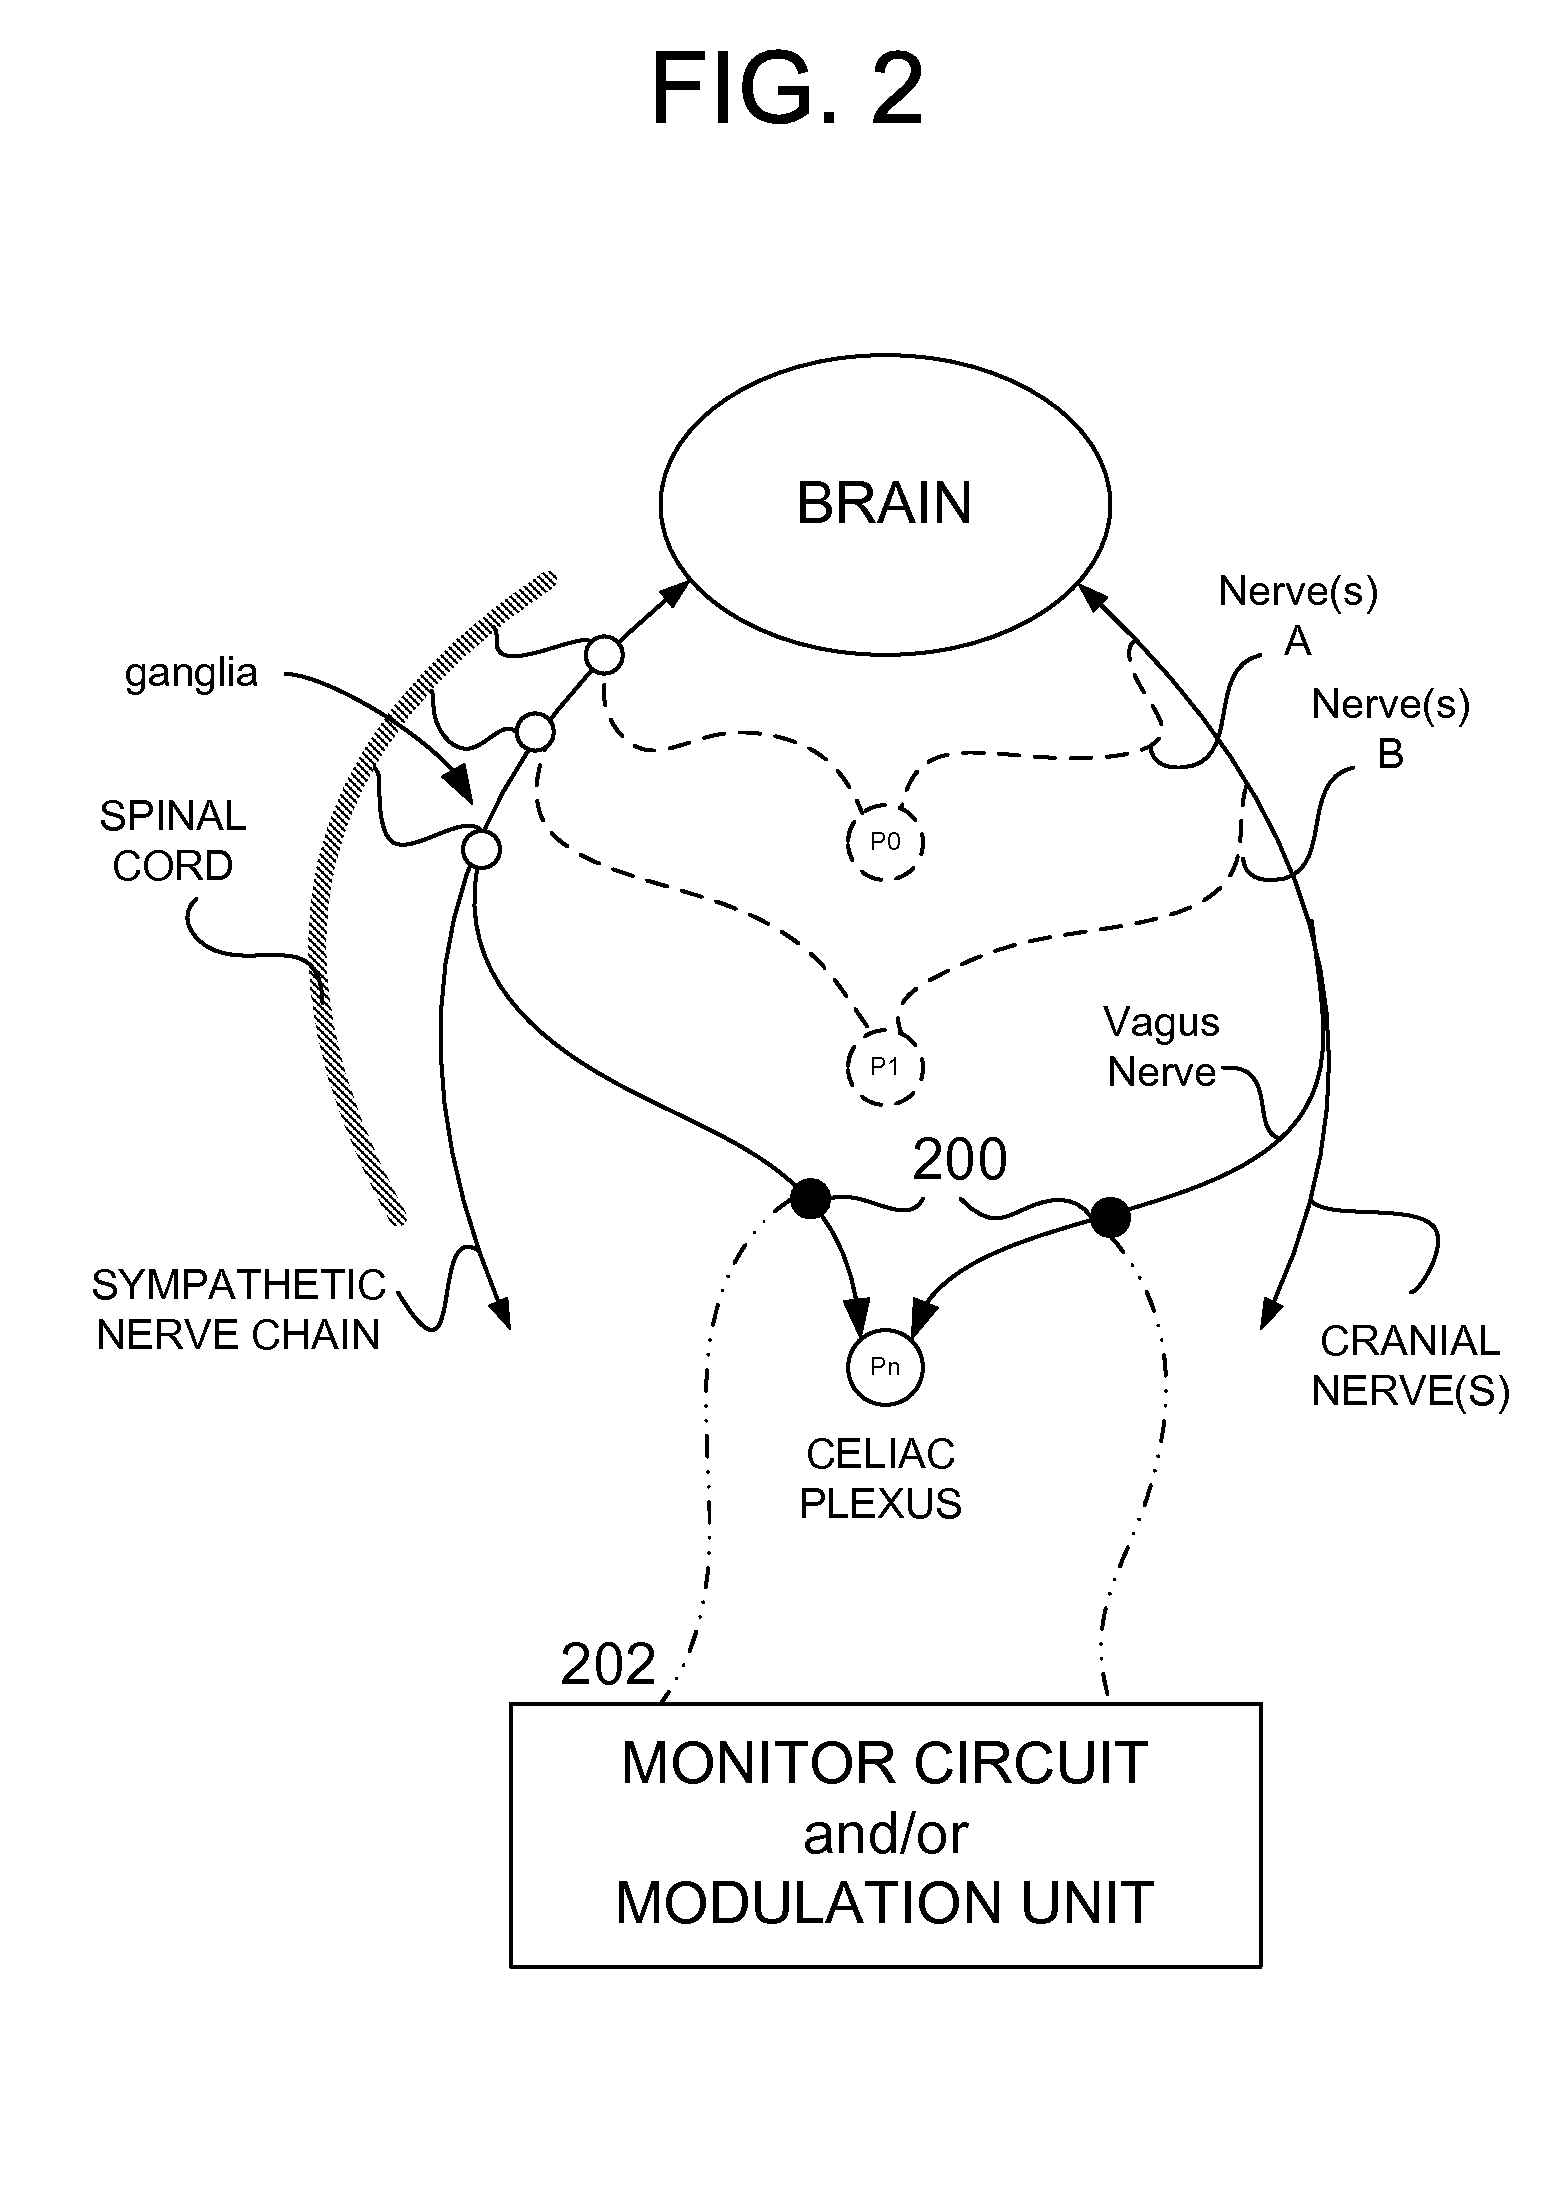 Methods And Apparatus For Treating Disorders Through Neurological And/Or Muscular Intervention